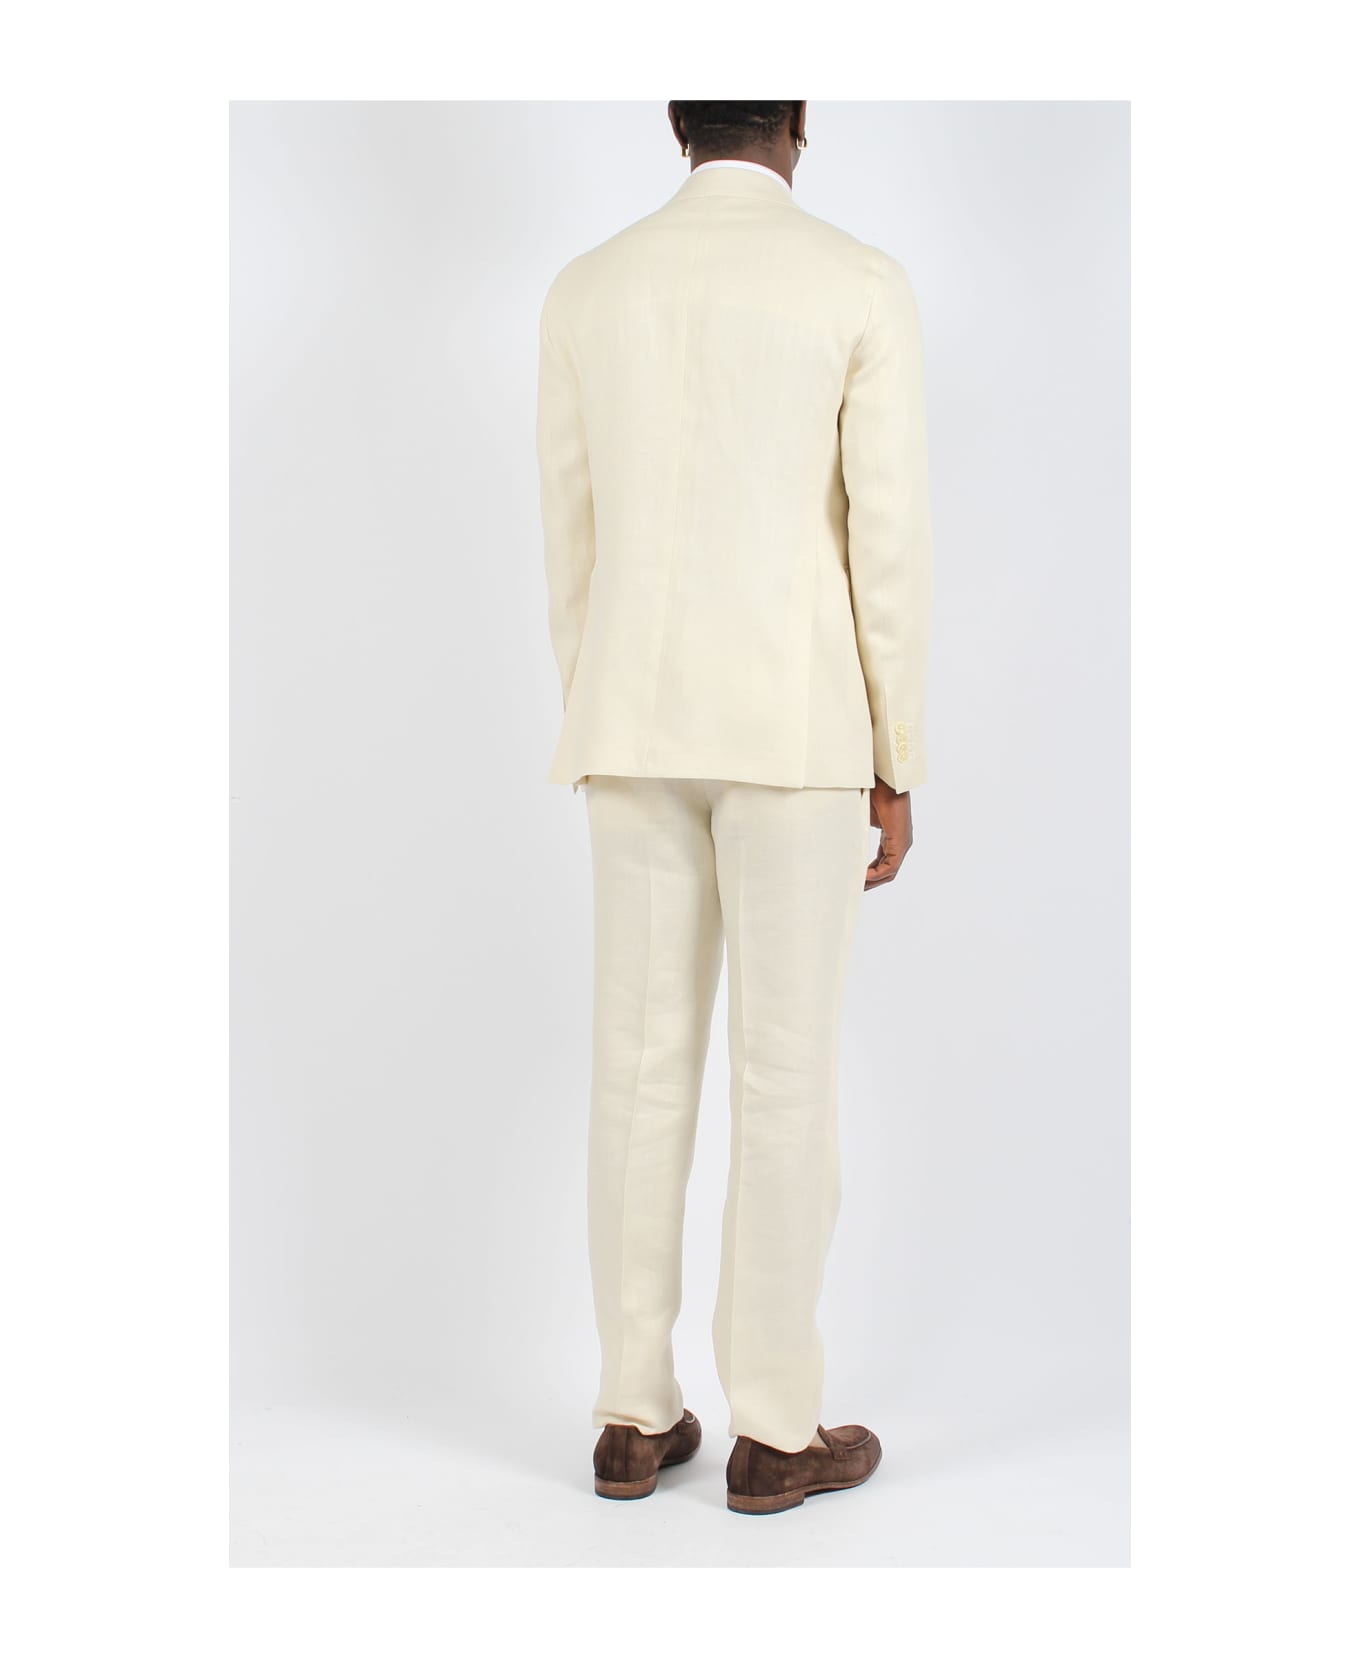 Tagliatore Linen Double-breasted Tailored Suit - White